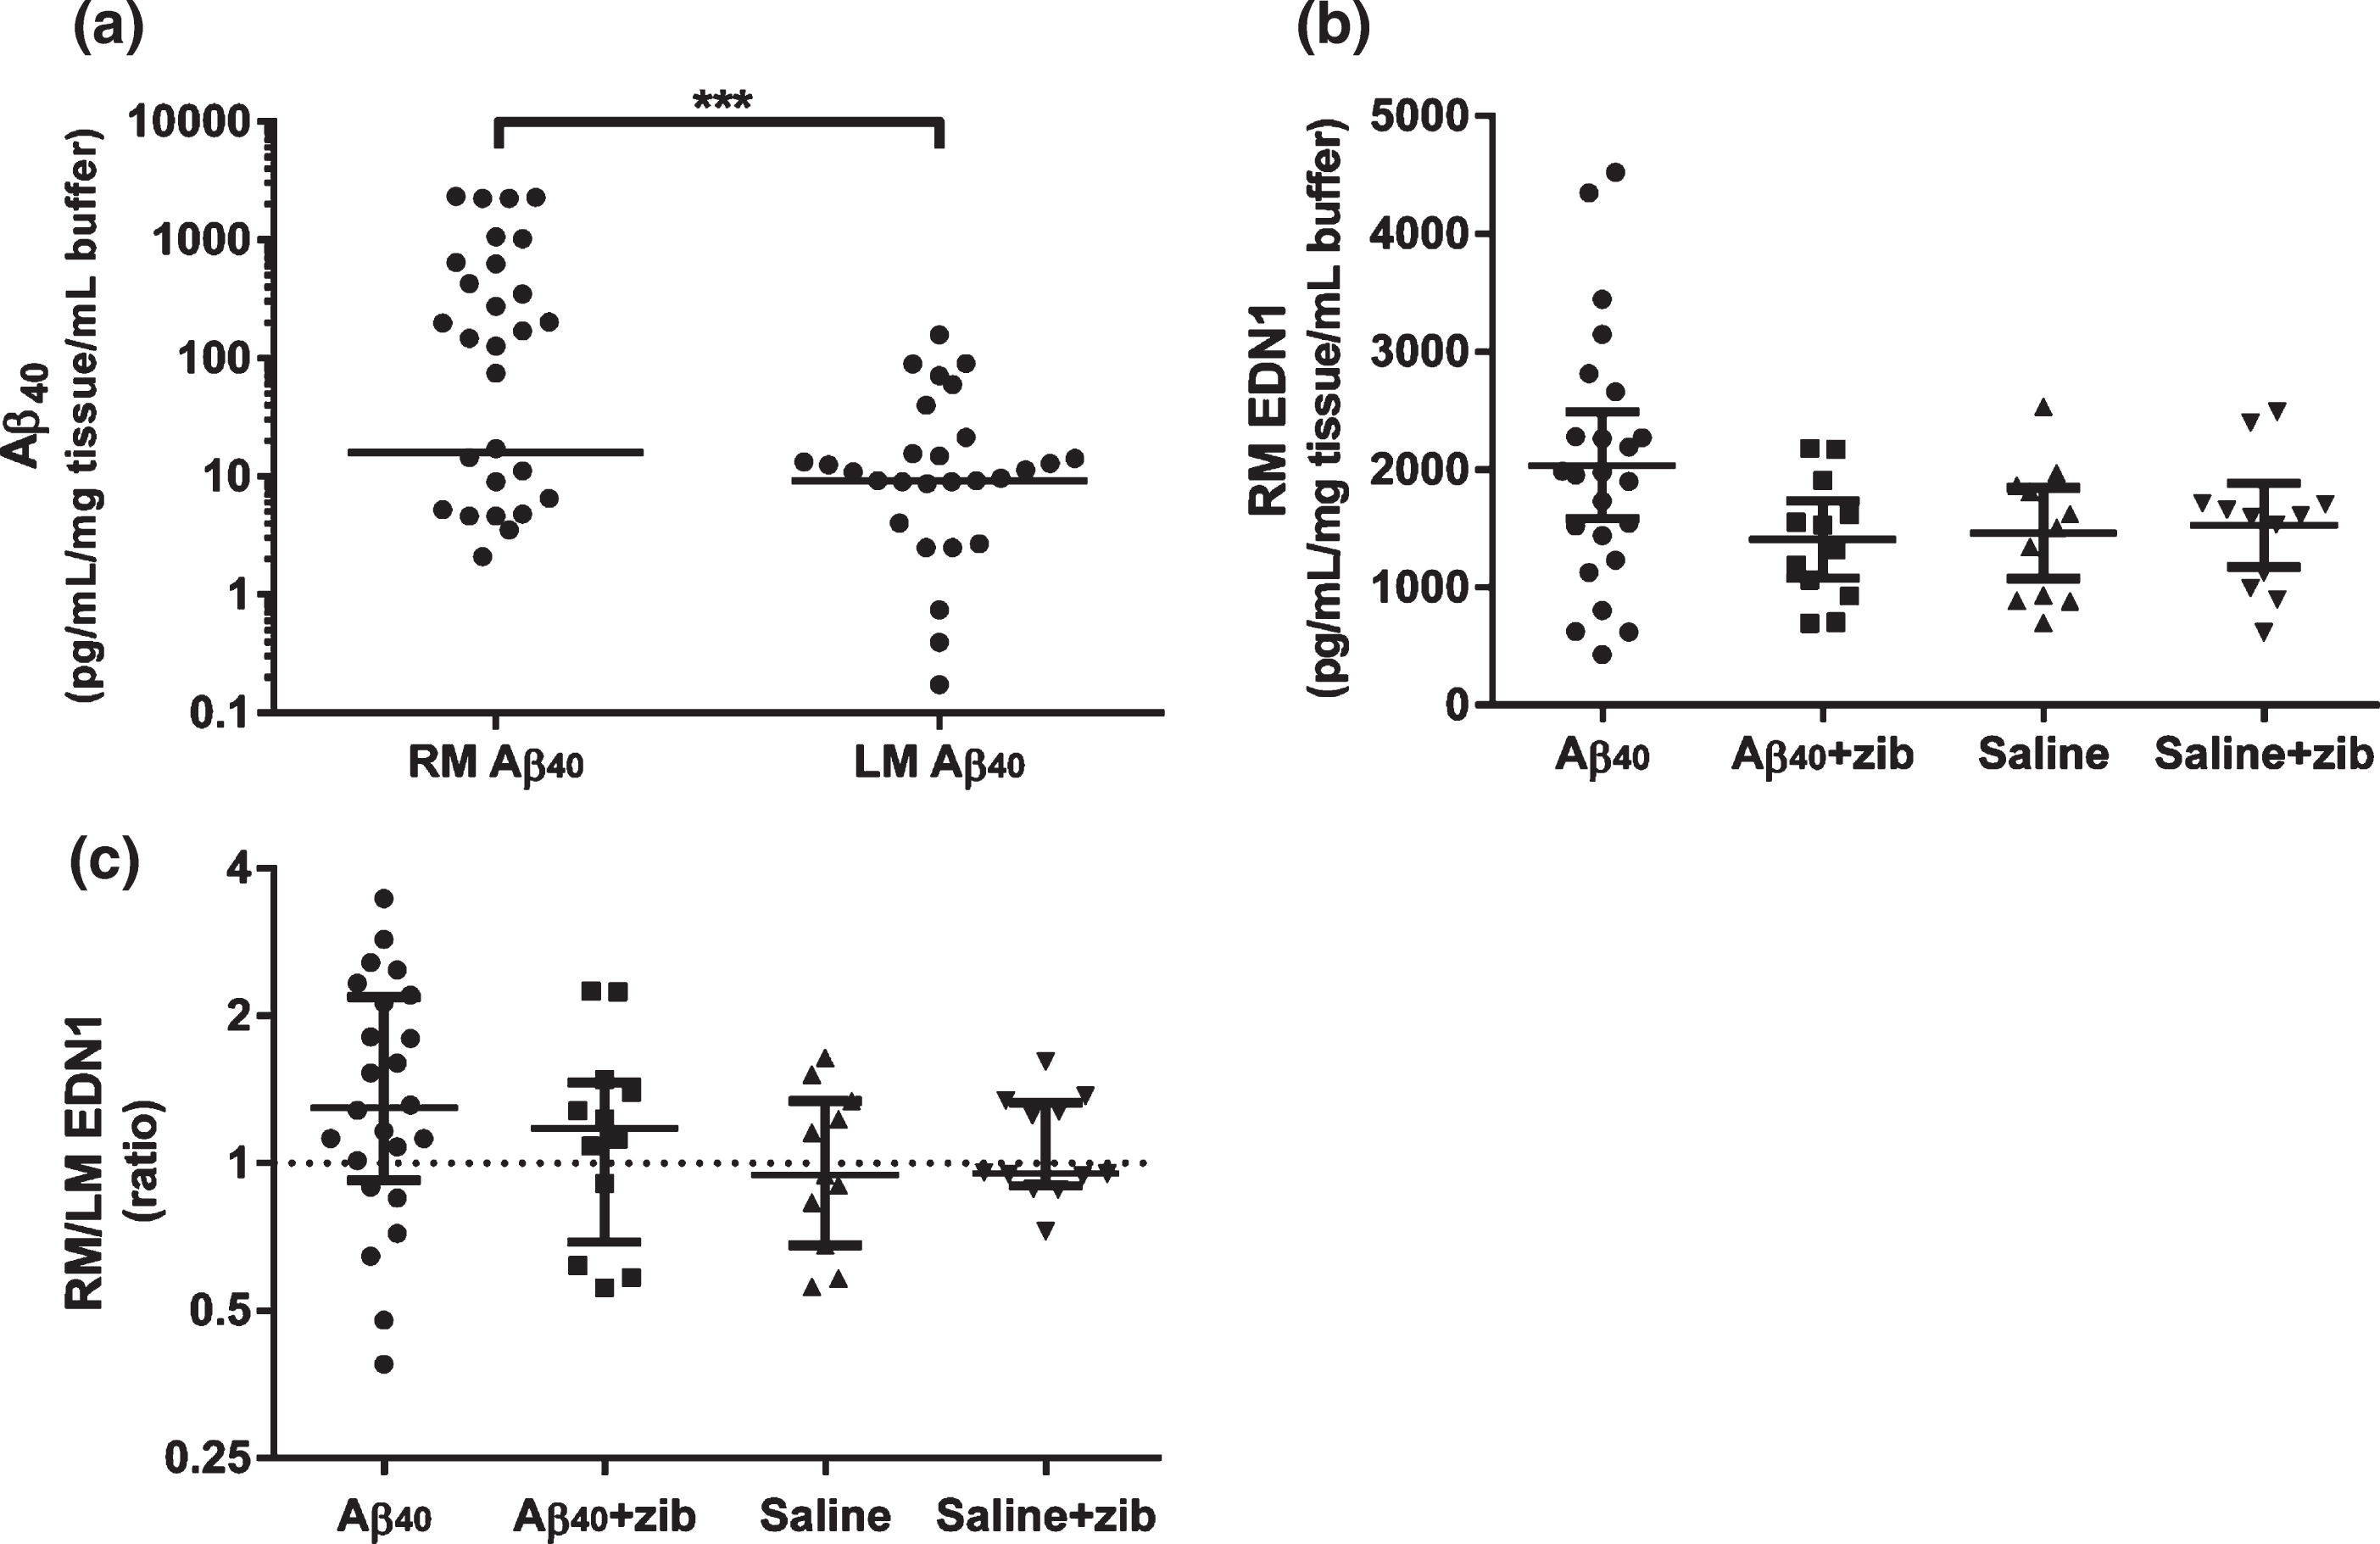 Aβ40 and EDN1 levels in brain tissue homogenates. Aβ40 and EDN1 levels measured by sandwich ELISA in rat brain tissue in homogenates from the left middle (LM) and right middle (RM; infusion site) hemispheres. a) Aβ40 in RM (n = 36) and LM (n = 35) samples. The horizontal lines show median Aβ40 levels; zero values (below detection limit) are not shown on the logarithmic scale (LM: n = 7/35, RM: n = 8/36) but were included for analysis. We used a Wilcoxon signed rank to test the null hypothesis (H0) that the median Aβ40 in each hemisphere did not differ significantly from zero. The median Aβ40 level was elevated in both hemispheres: RM group (15.9 (range 0–2335); W = 406, p < 0.0001) and LM group (9.16 (0-158); W = 406, p < 0.0001). A Wilcoxon matched-pairs signed rank test found a significant median of differences of 4.78 between RM and LM (n = 35; 95.9% CI: 0–202; p = 0.0003), reflecting a higher level of Aβ40 close to the site of infusion. Graph (b) shows RM mean EDN1 level (pg/mL/mg tissue/mL buffer) and 95% CI, and (c) shows the RM/LM EDN1 ratio, with values, median±inter-quartile range (IQR) plotted on a logarithmic scale. One-way ANOVA with Sidak’s multiple comparisons test was used to compare EDN1 levels. No significant variation was found in (b) RM (F3,55 = 2.40, p = 0.078) or LM (F3,55 = 0.182, p = 0.908; not shown). Although not significant, the greatest change in EDN1 was found in the RM of the Aβ40 group. We compared the median (c) EDN1 ratio of RM/LM in each group to the hypothetical median ratio (H0 = 1) by Wilcoxon signed-rank test. The median (1.30 (IQR 0.923–2.18)) was significantly elevated in the Aβ40 group (W = 188; p = 0.006) but not significantly altered in the other groups.